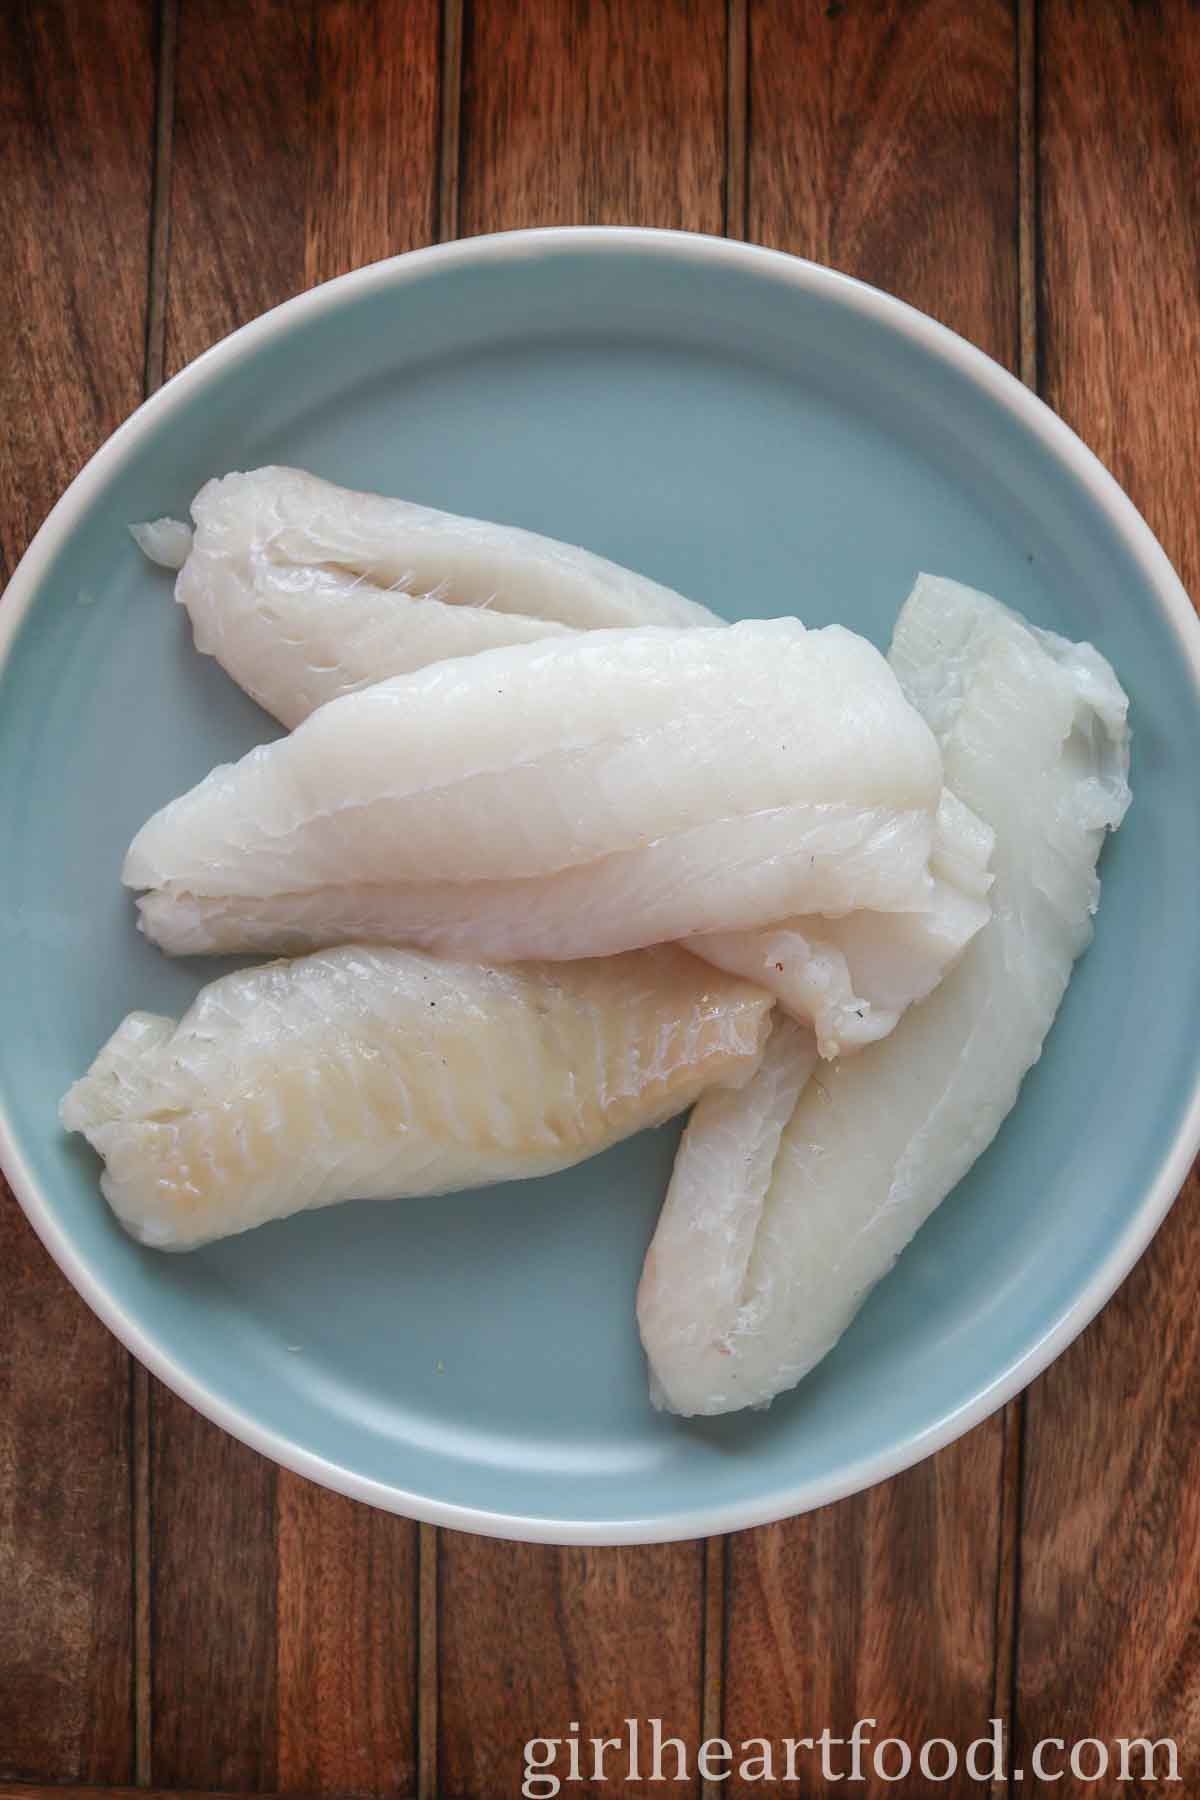 Four uncooked cod fillets on a light blue plate.